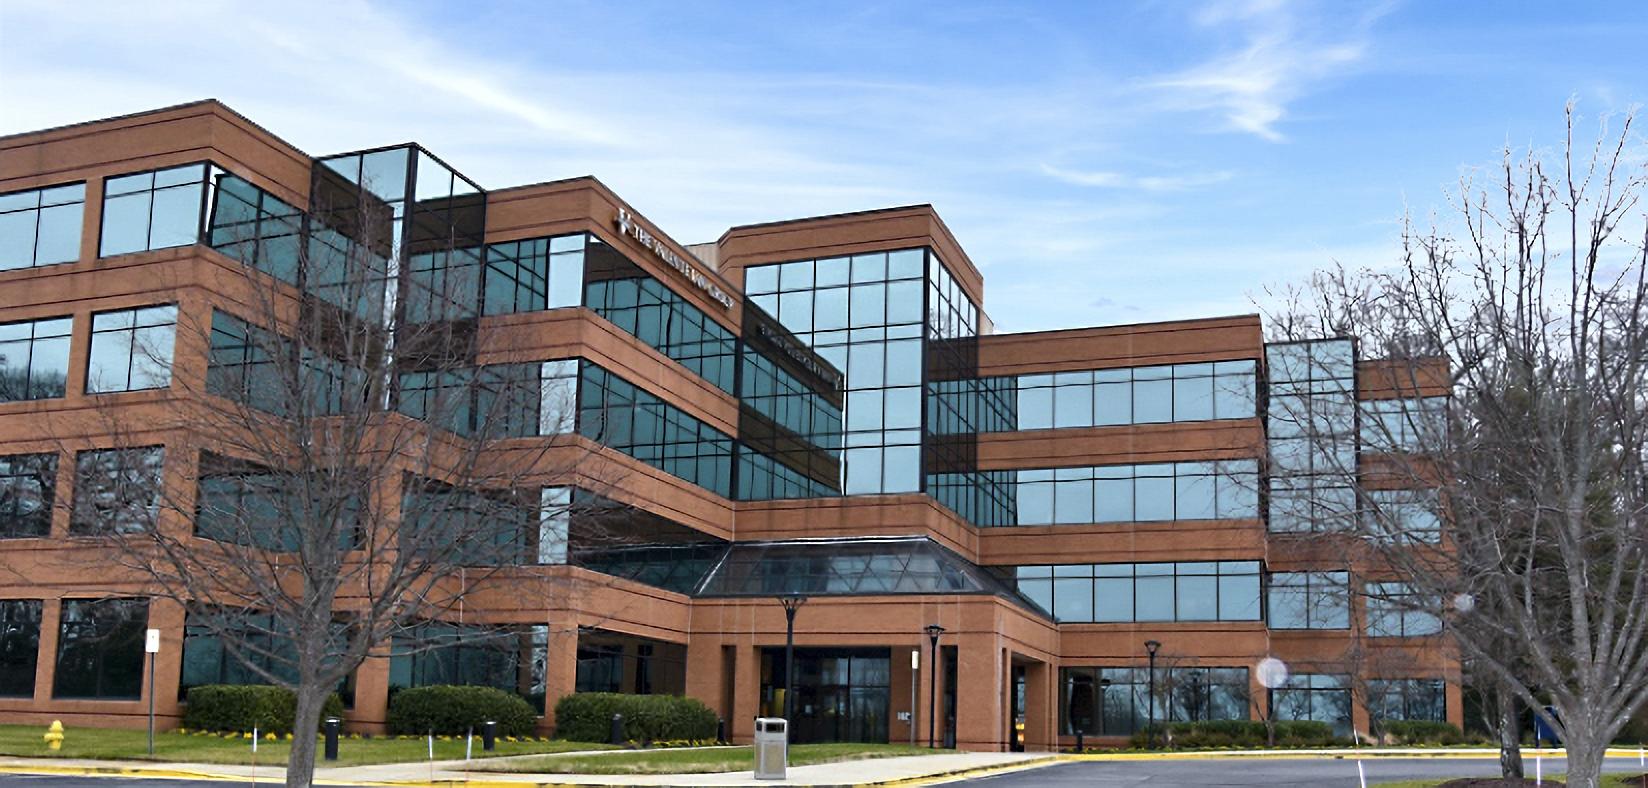 Shah Medical Group at Crofton Medical Center is located in a modern brick and glass building.